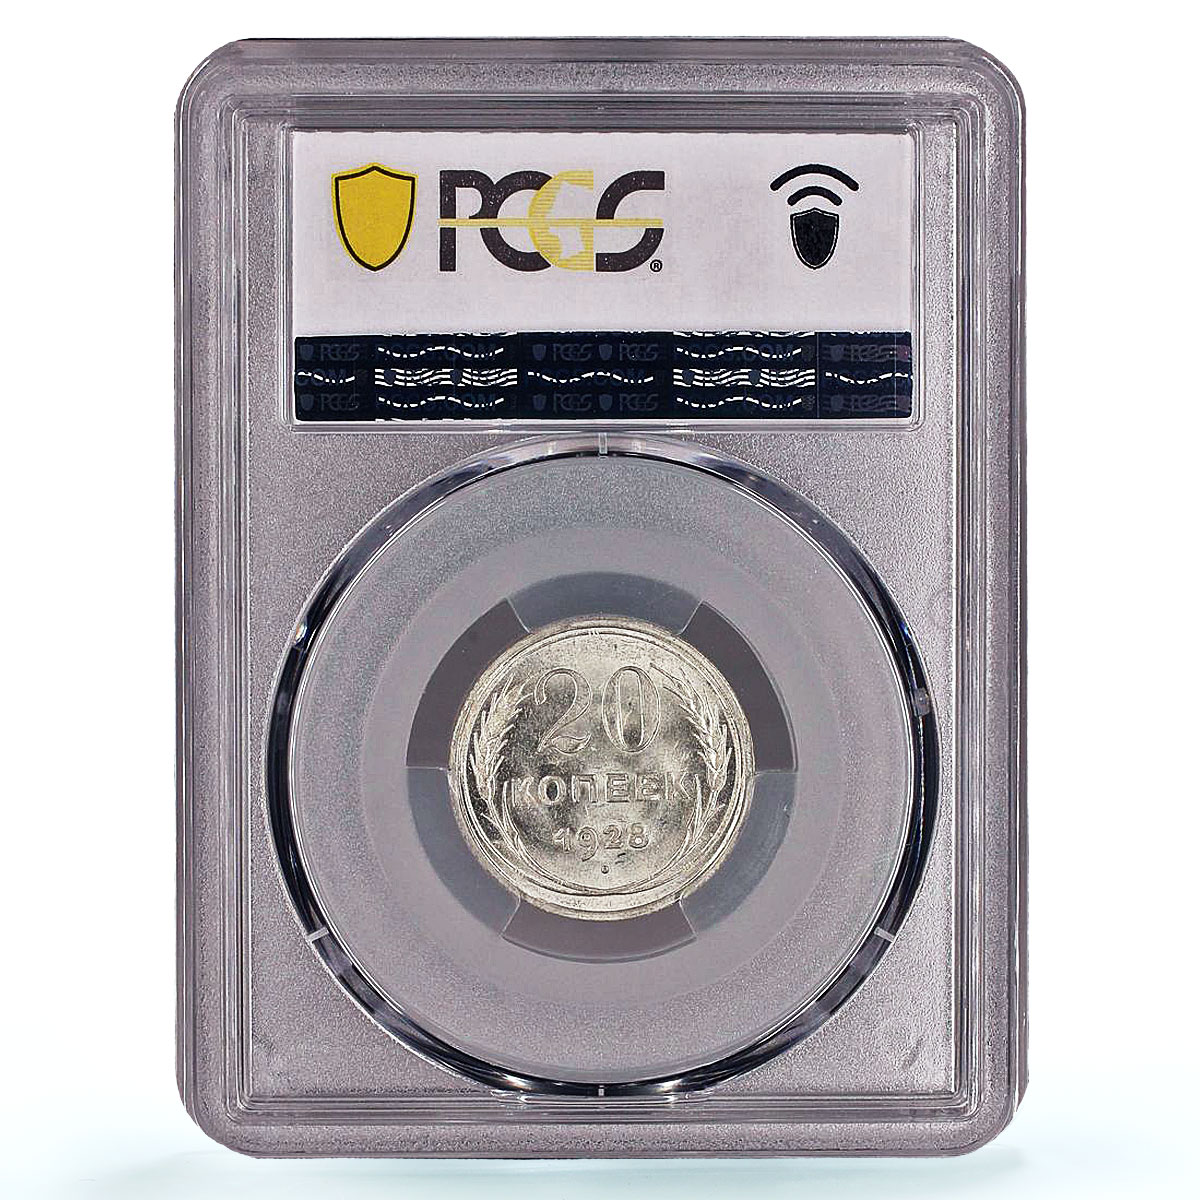 Russia USSR RSFSR 20 kopecks Regular Coinage Y-88 MS64 PCGS silver coin 1928